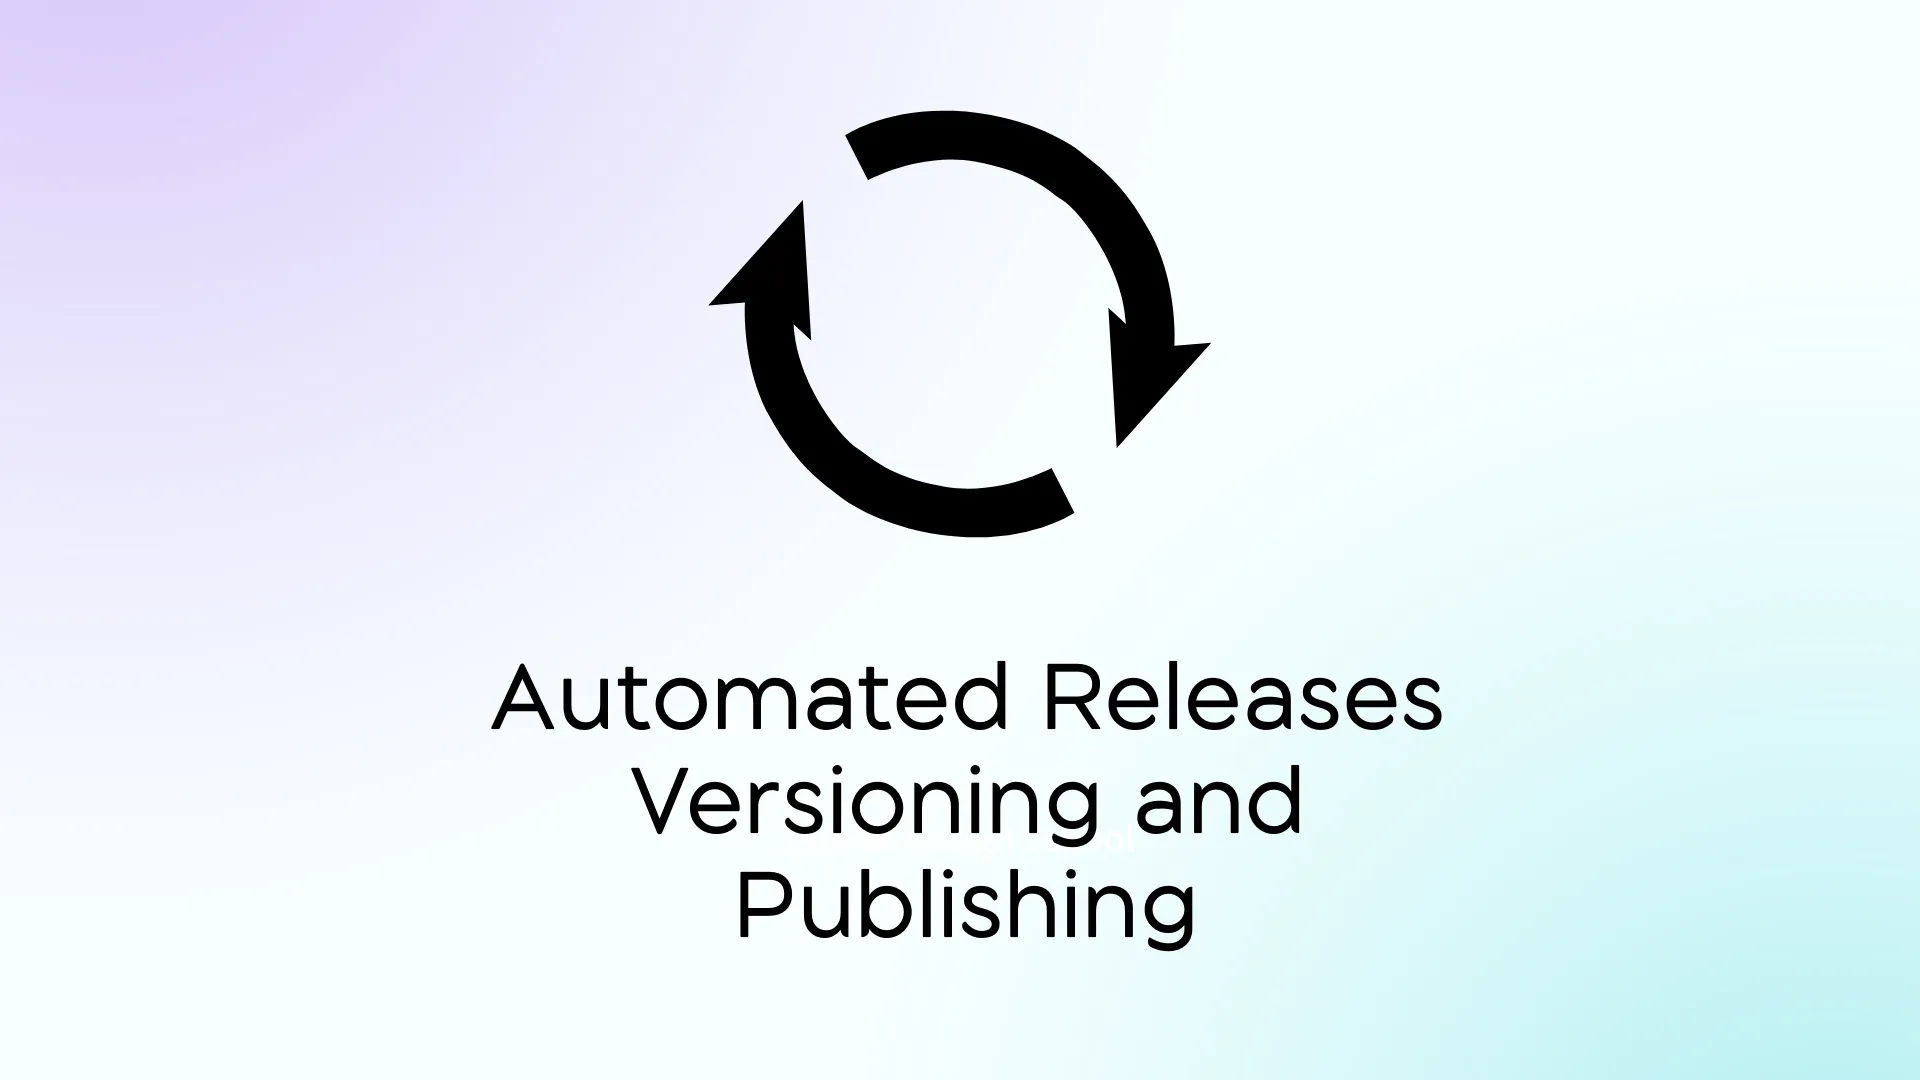 Arrows representing a cycle, followed by the text "Automated Releases Versioning and Publishing".